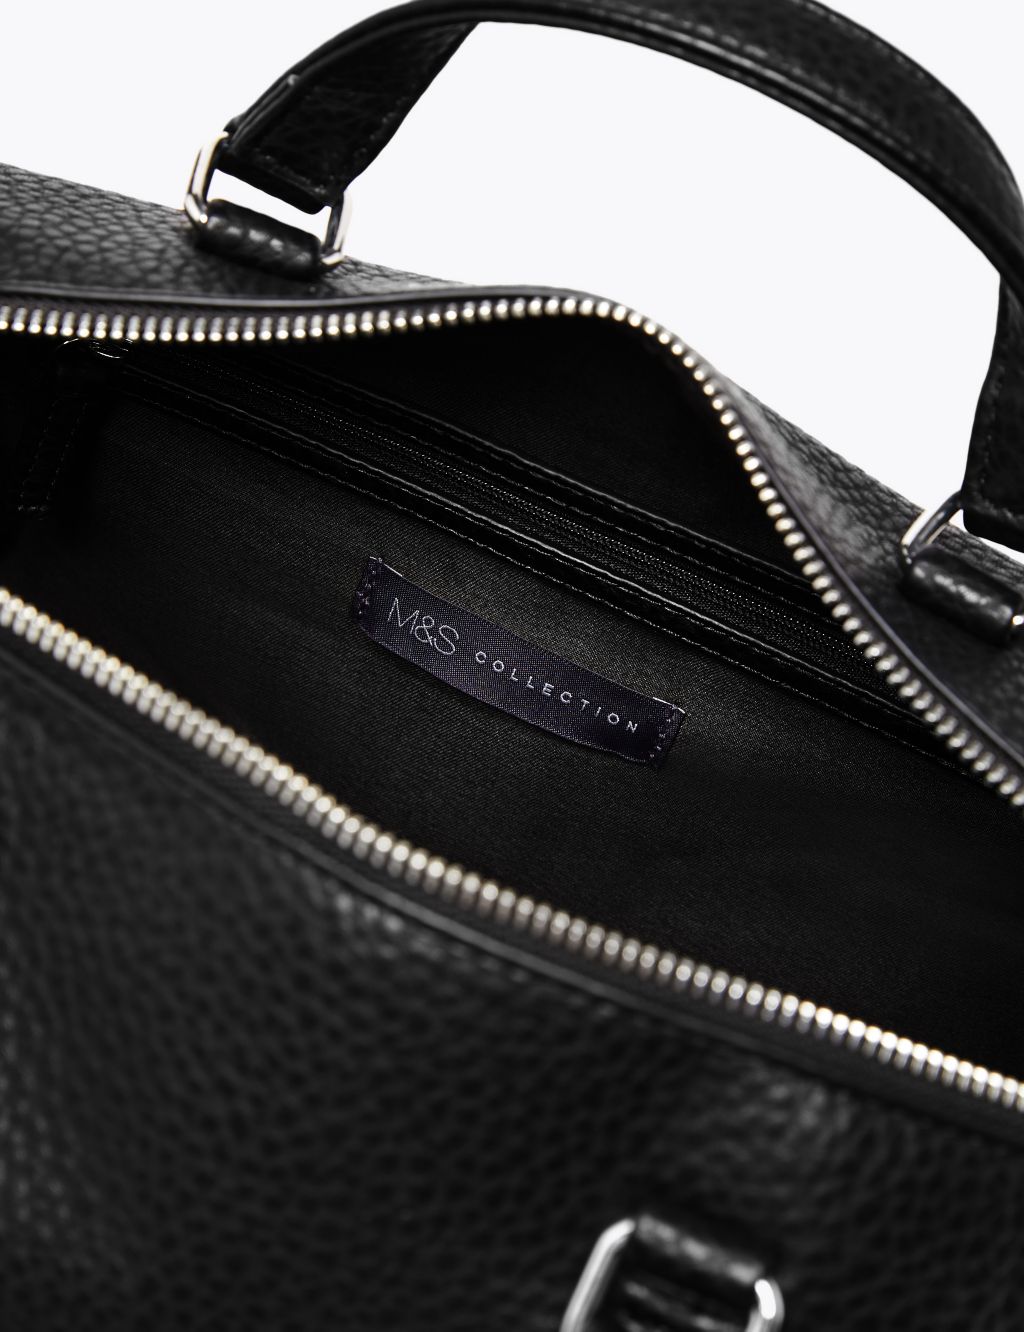 Bowler Bag | M&S Collection | M&S